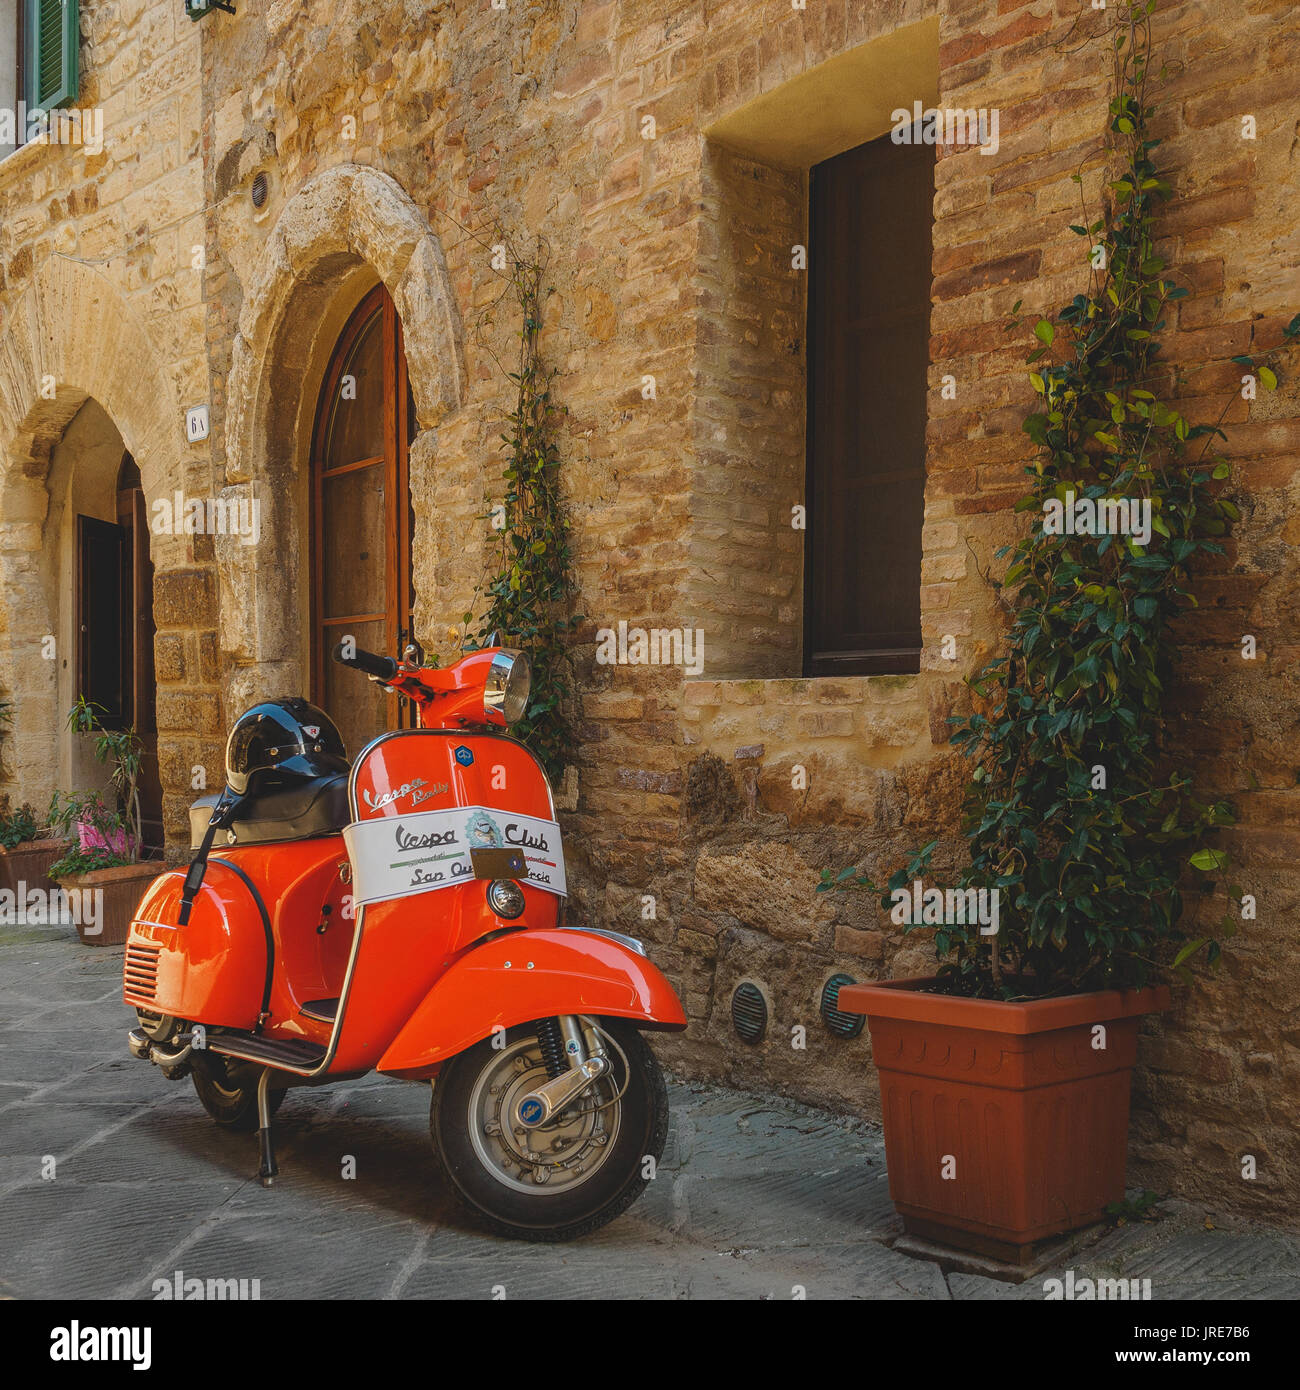 Vintage Vespa Piaggio parked in a street of a Tuscan town. Italy, 2017. Stock Photo